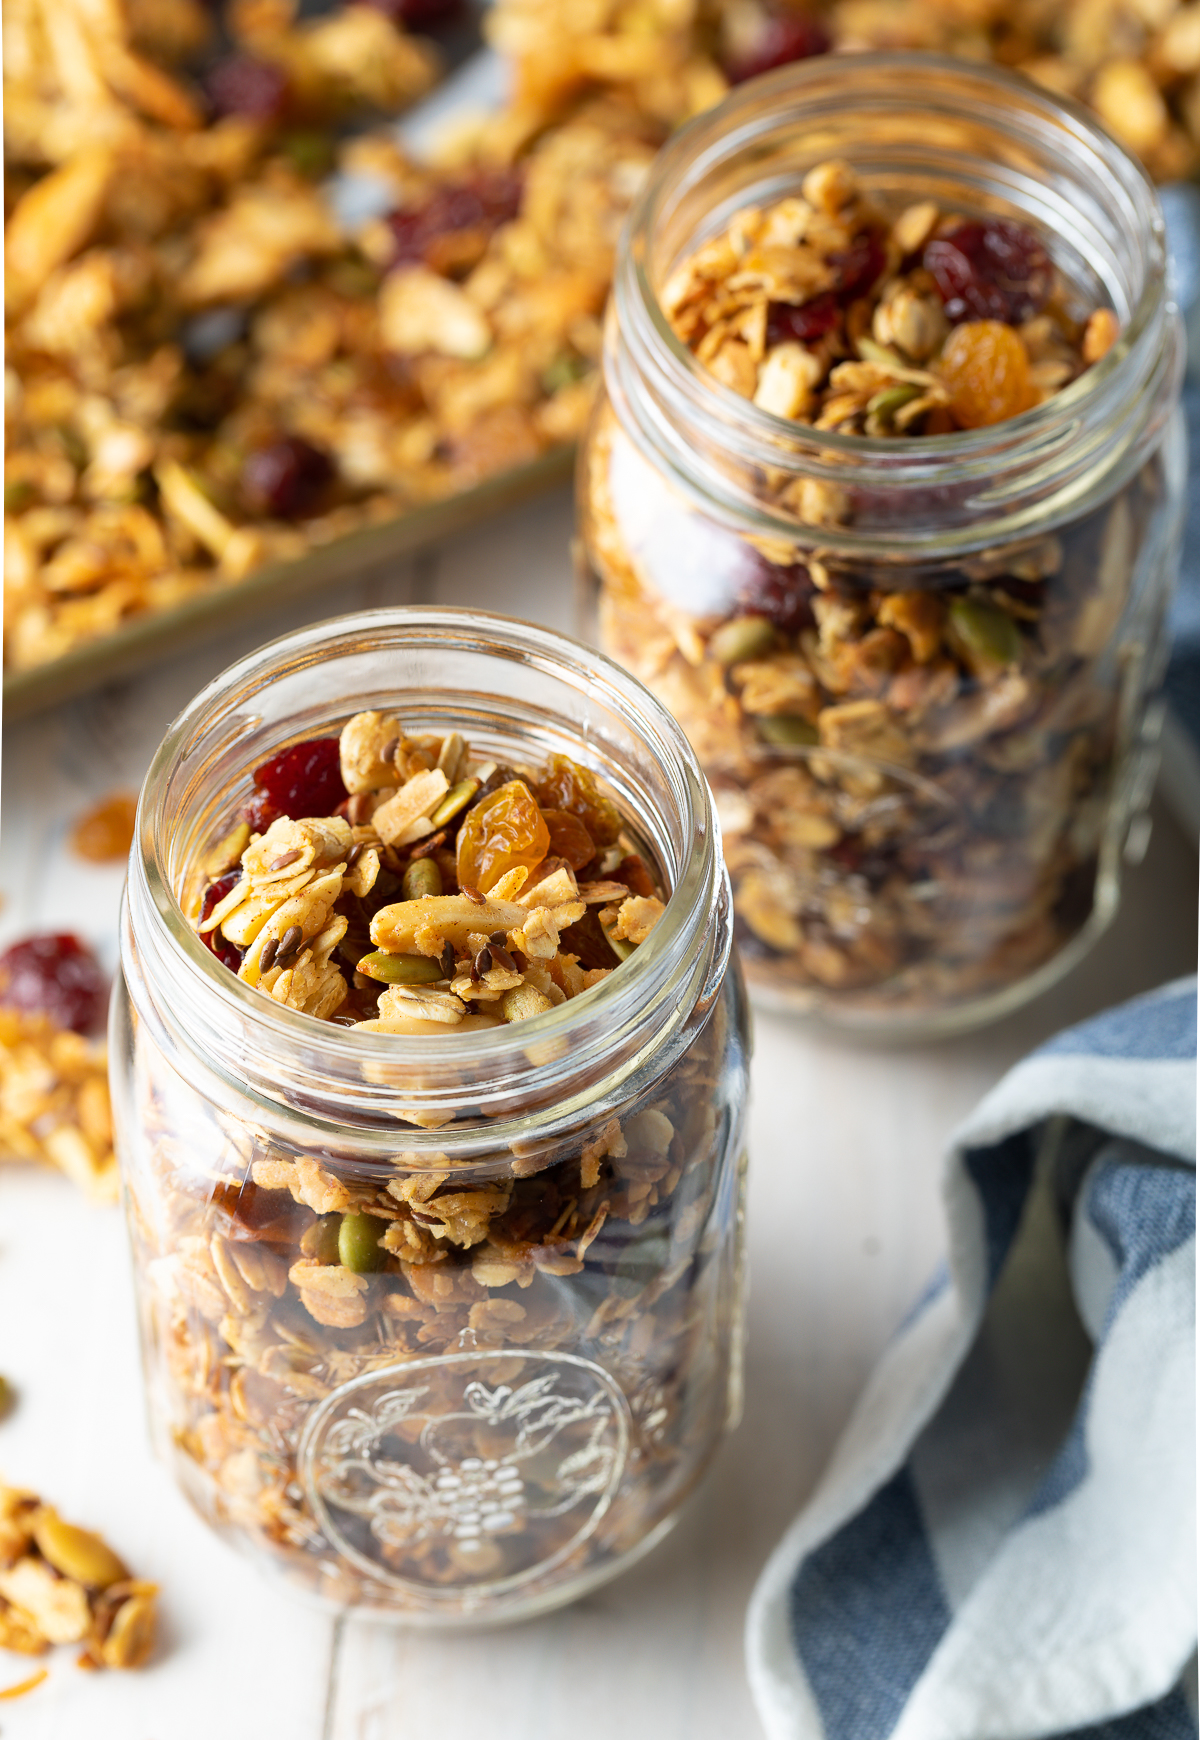 Homemade Granola with dried fruit and nuts